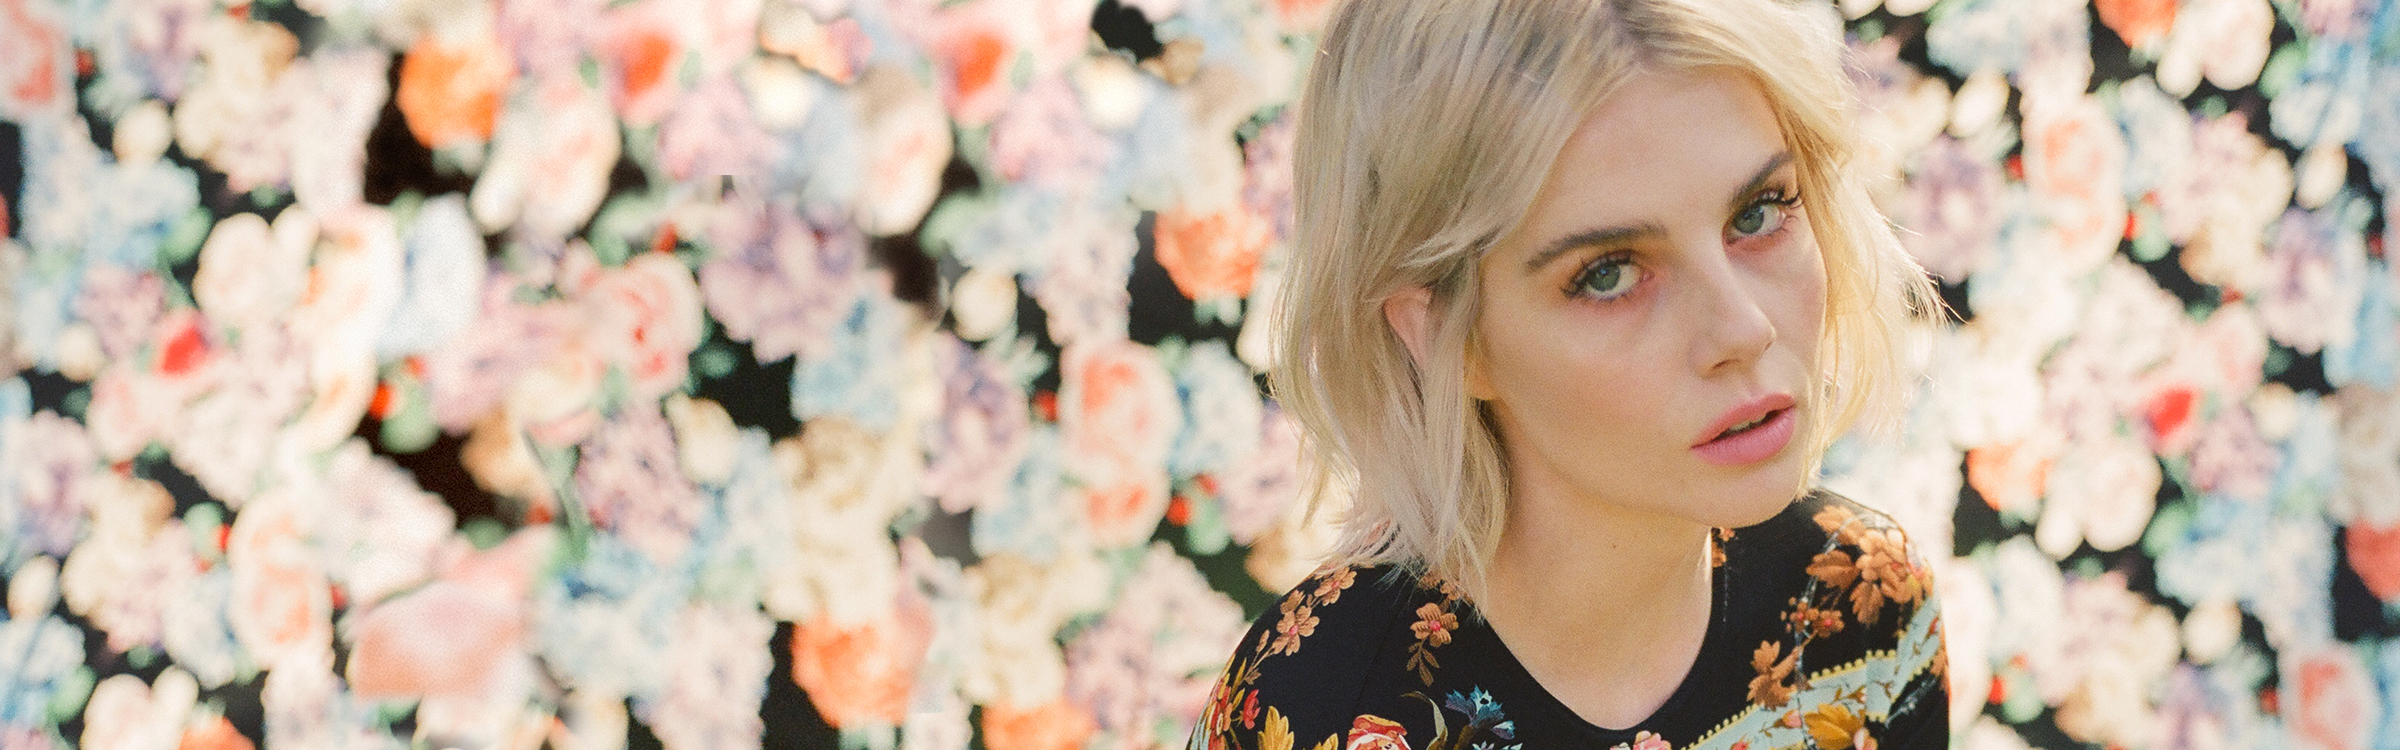 Lucy Boynton Is Already 2019's Most Exciting Fashion Star